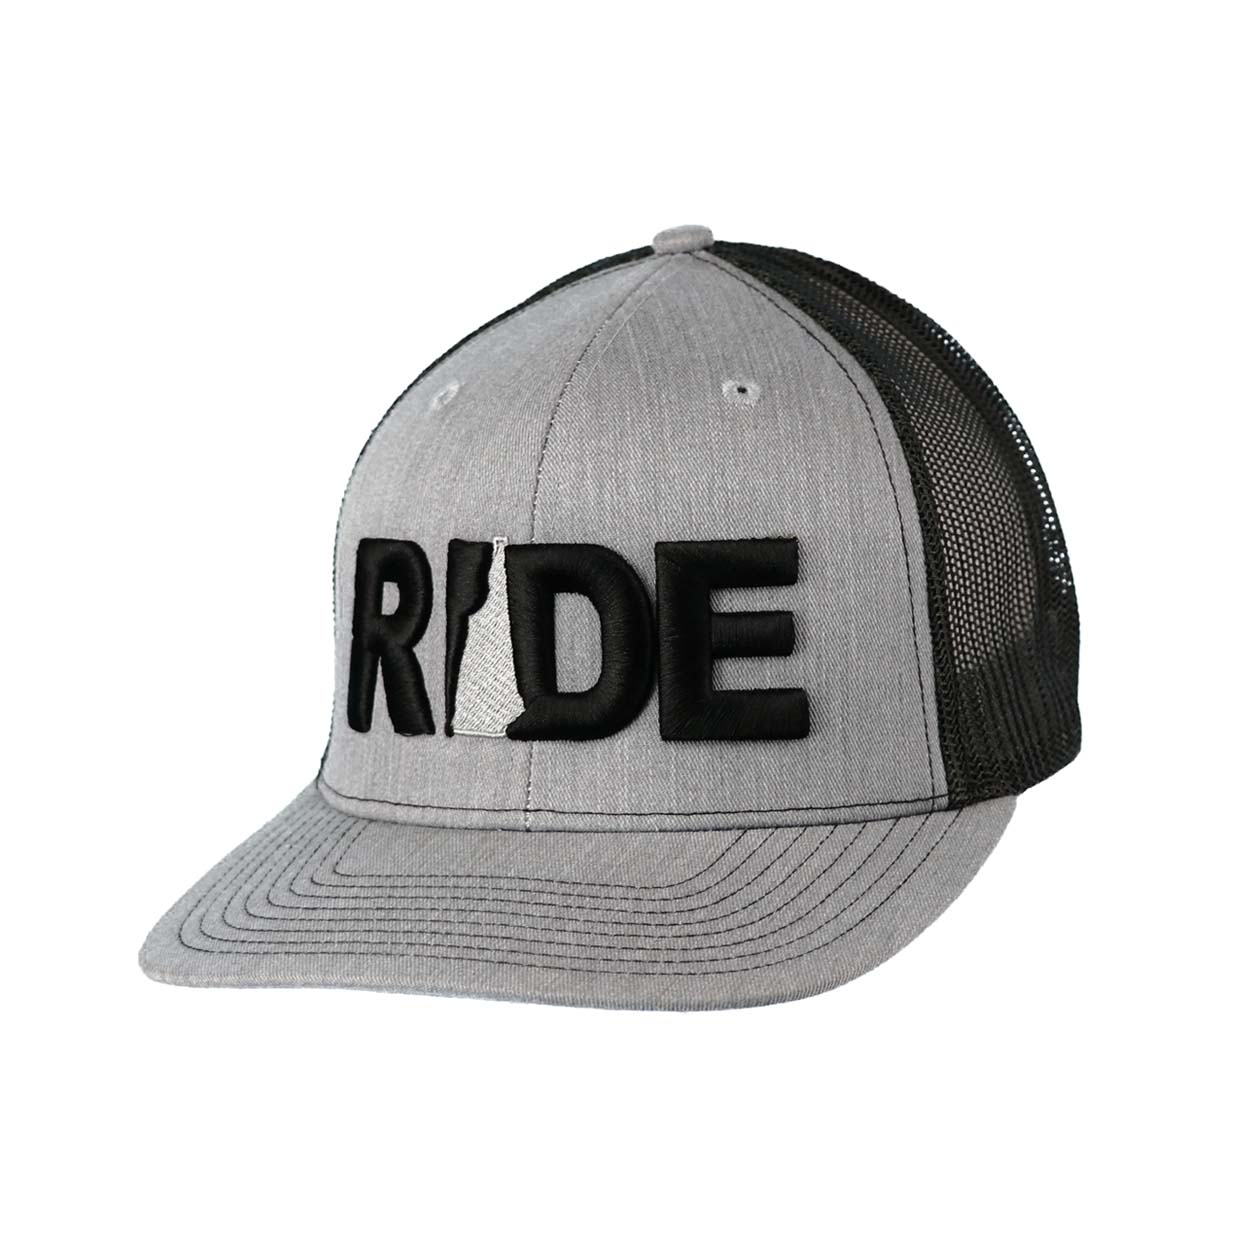 Ride New Hampshire Classic Embroidered Snapback Trucker Hat Heather Gray/Black